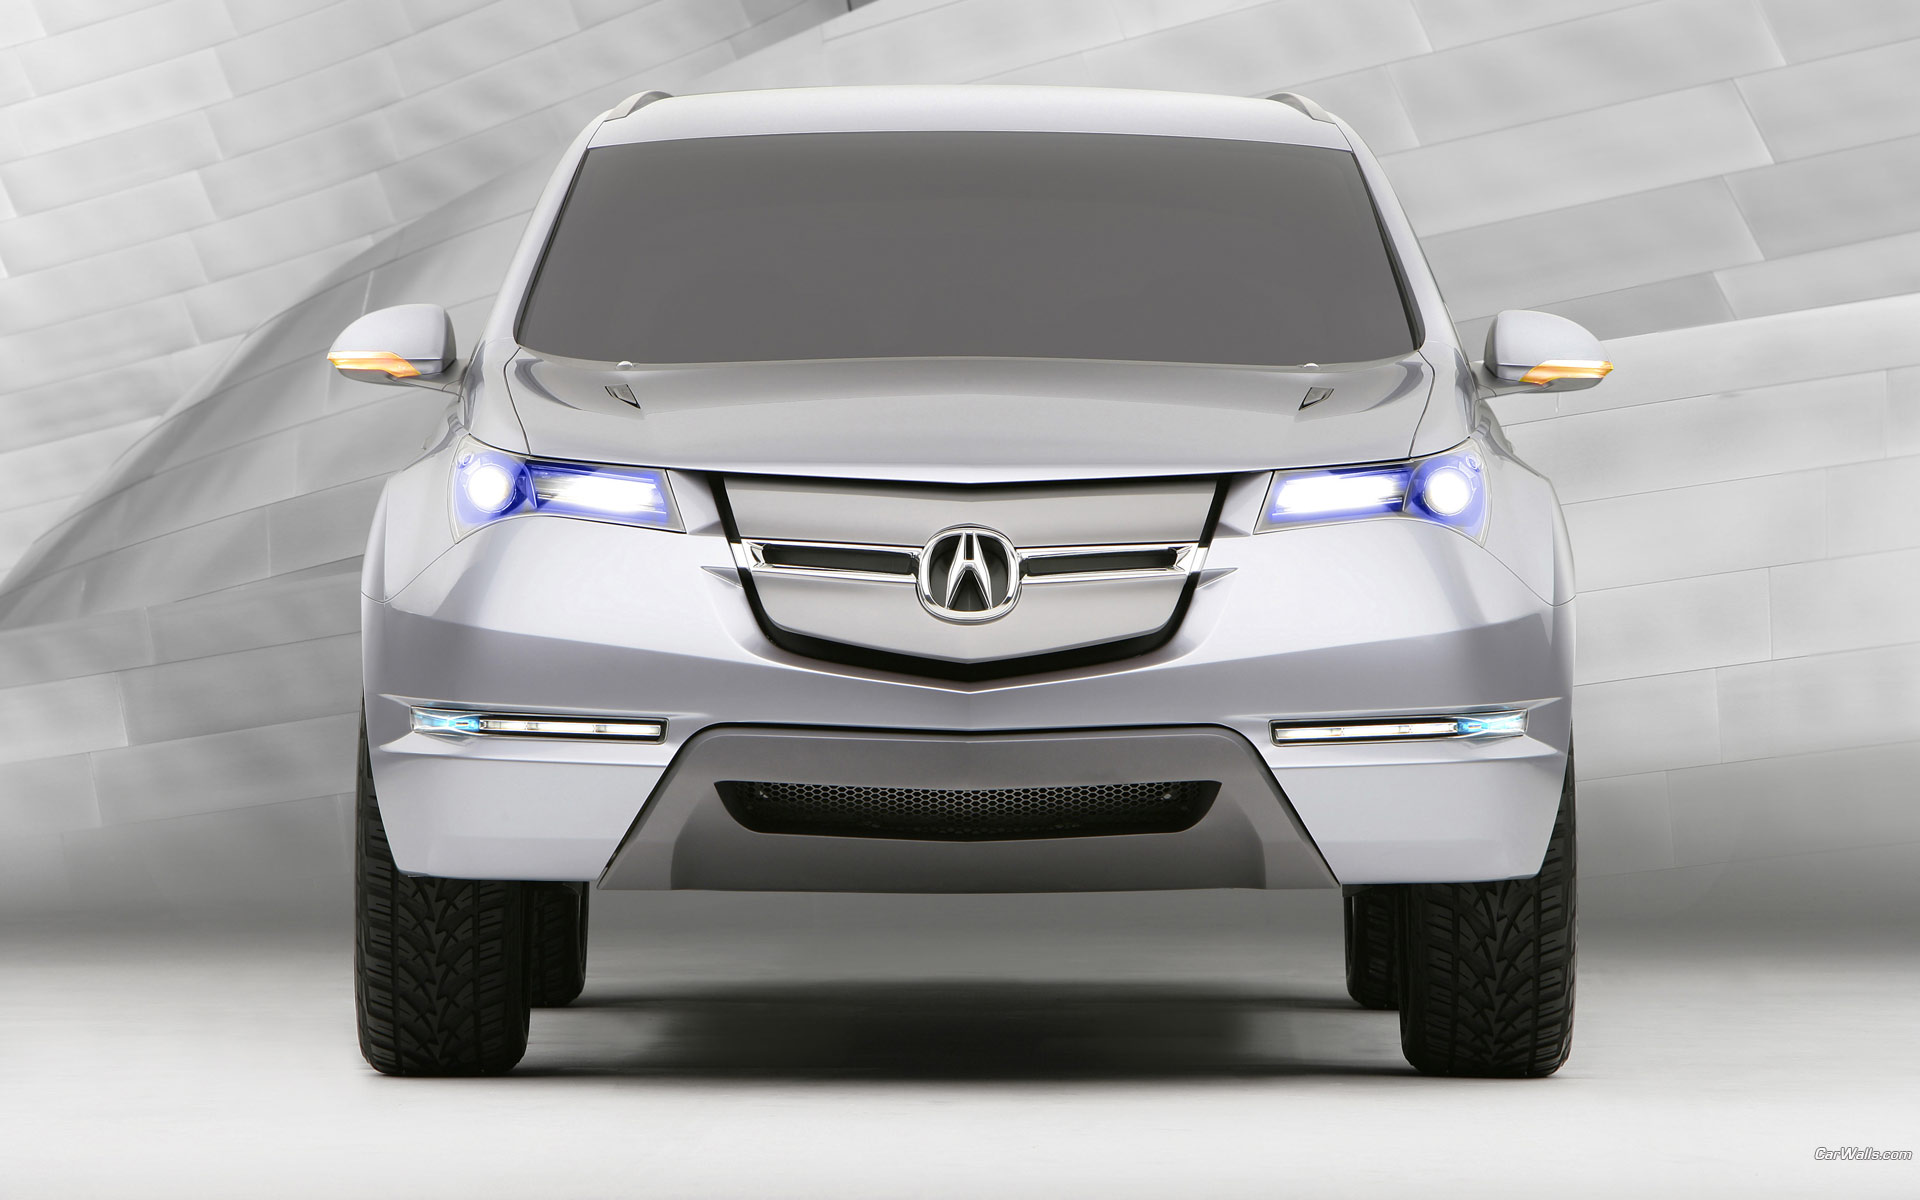 Download HQ Acura MD X Front Concept Acura wallpaper / 1920x1200